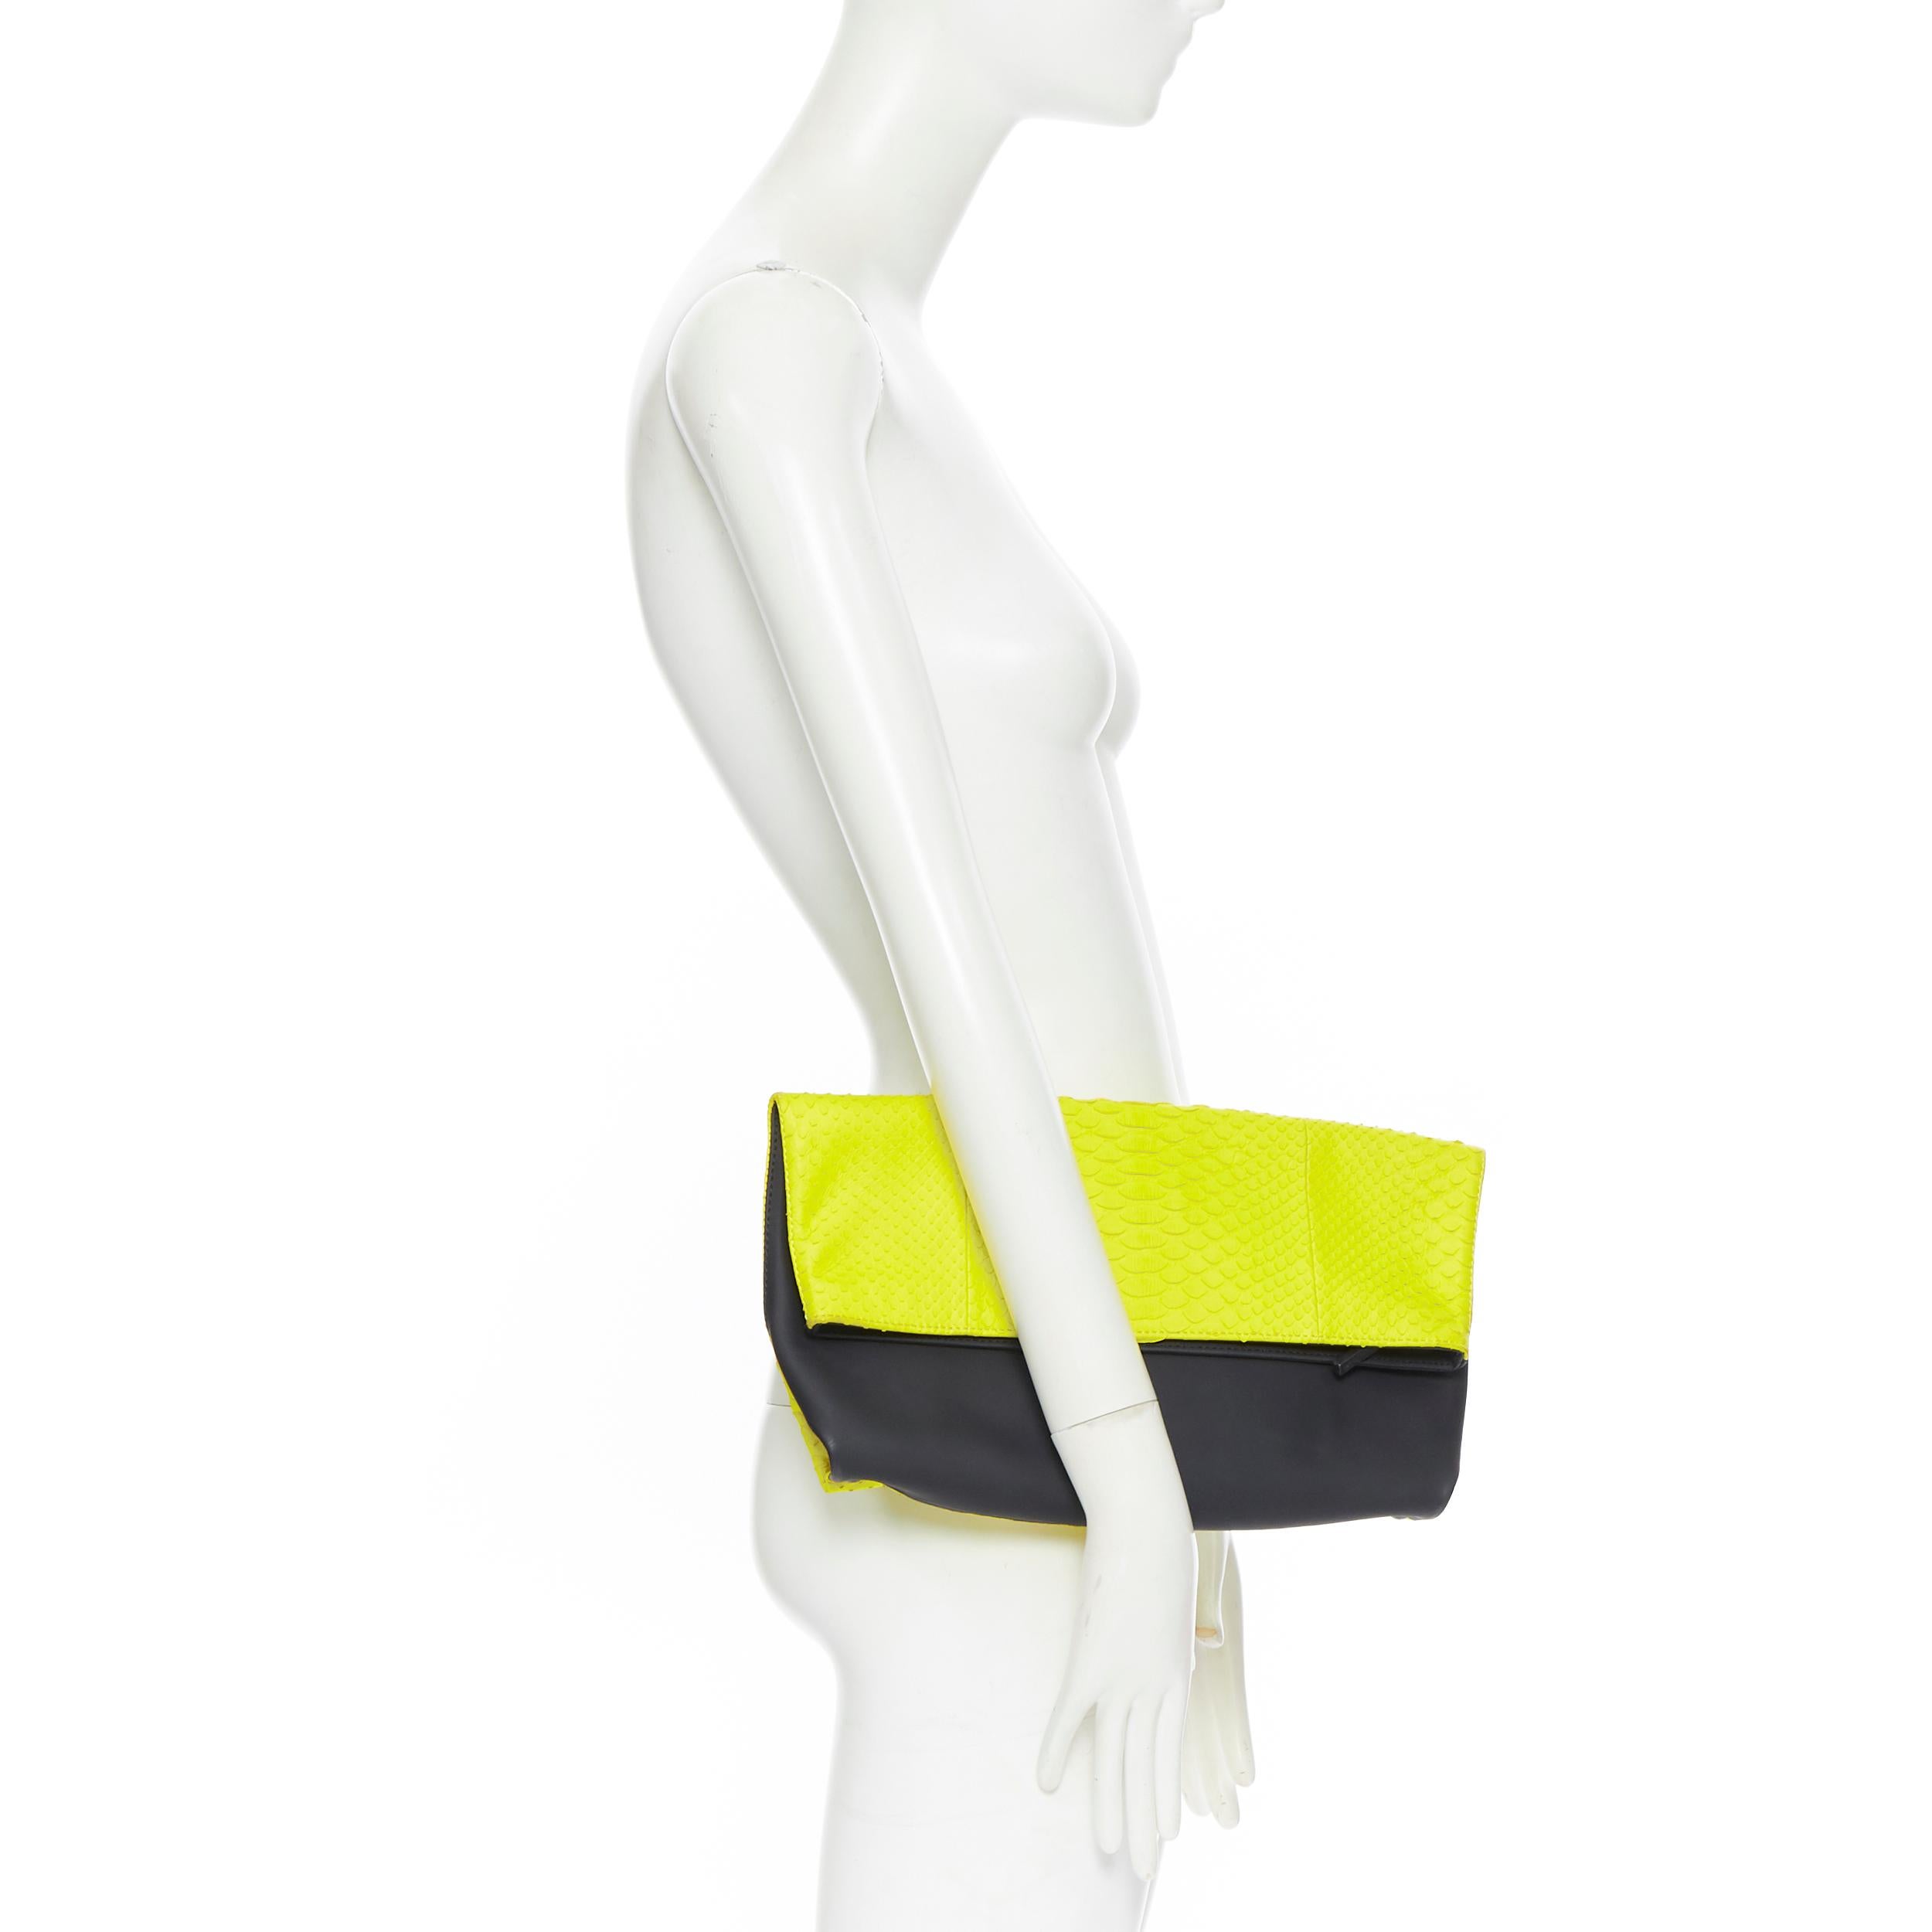 EMILIO PUCCI neon yellow scaled pleather black rubber fold over clutch bag 
Brand: Emilio Pucci
Designer: Emilio Pucci
Model Name / Style: Foldover clutch
Material: Leather, PVC
Color: Yellow, black
Pattern: Solid
Closure: Zip
Extra Detail: Top zip